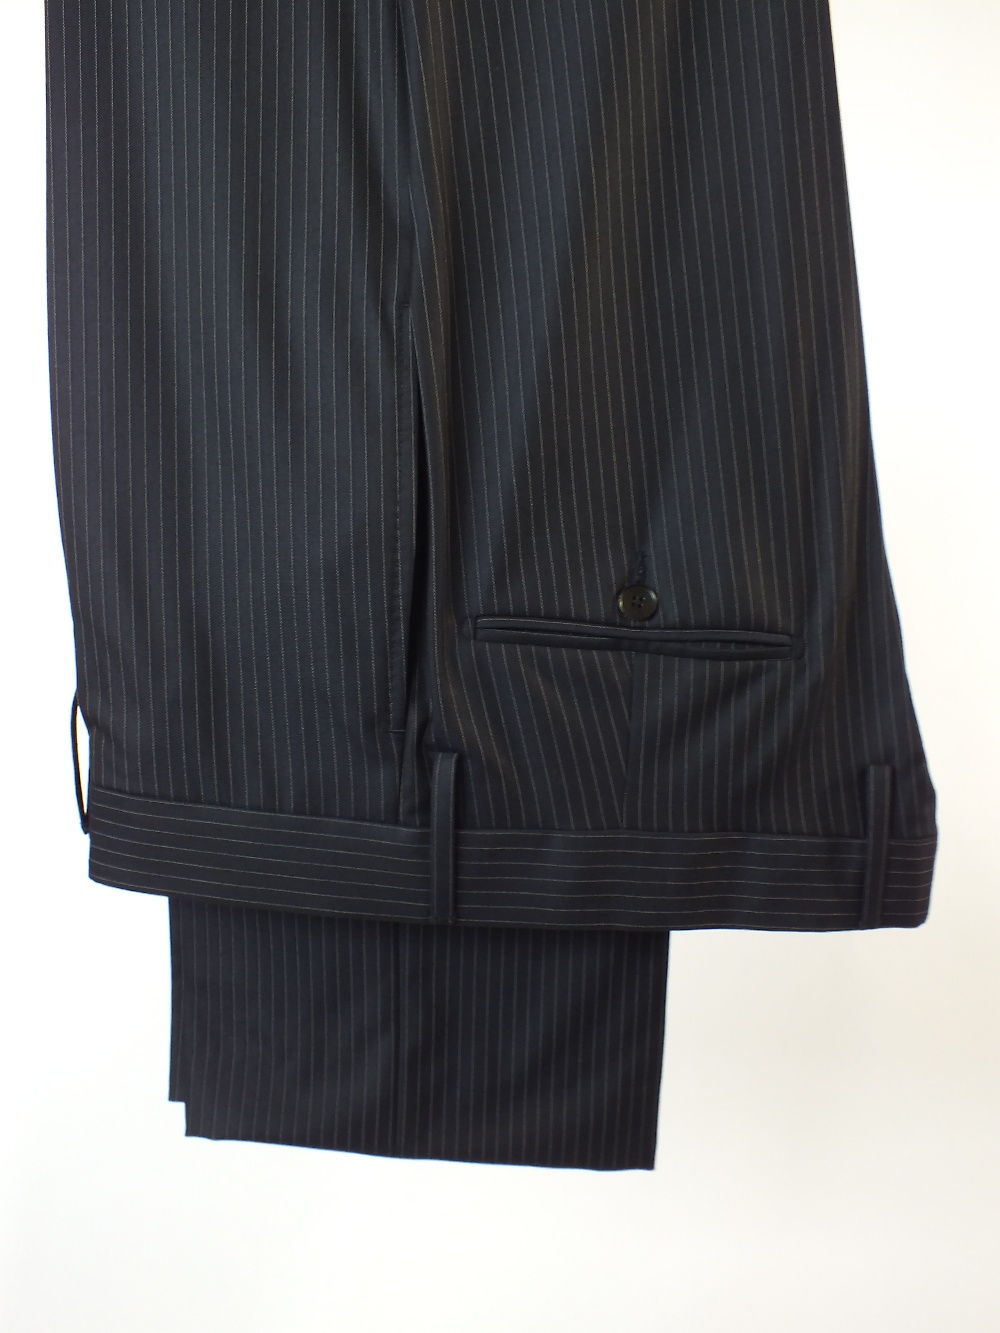 A Gucci suit, navy pinstripe, double vent, Italian size 50L, 80% wool, 20% silk, single pleat - Image 6 of 6